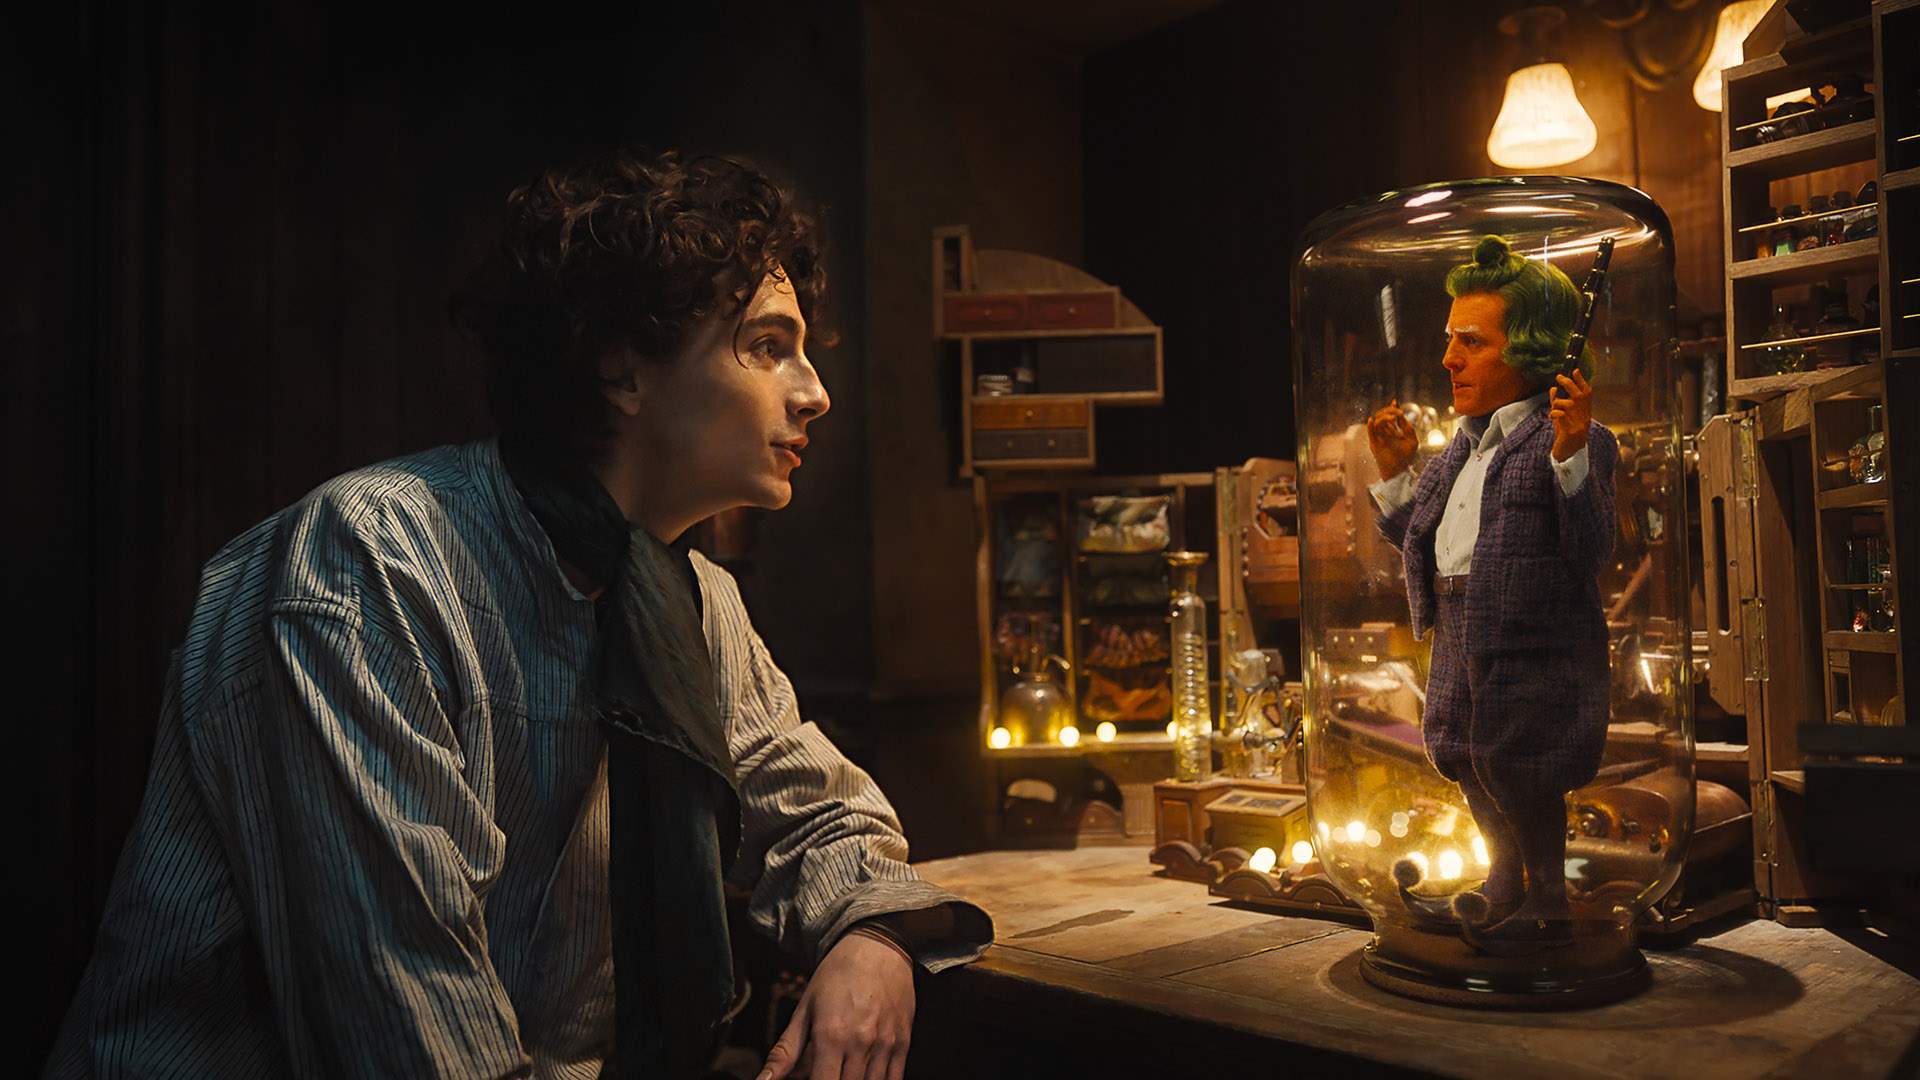 'Wonka' Has Been Fast-Tracked to Streaming So You Can Have a Sweet Time with Timothée Chalamet at Home